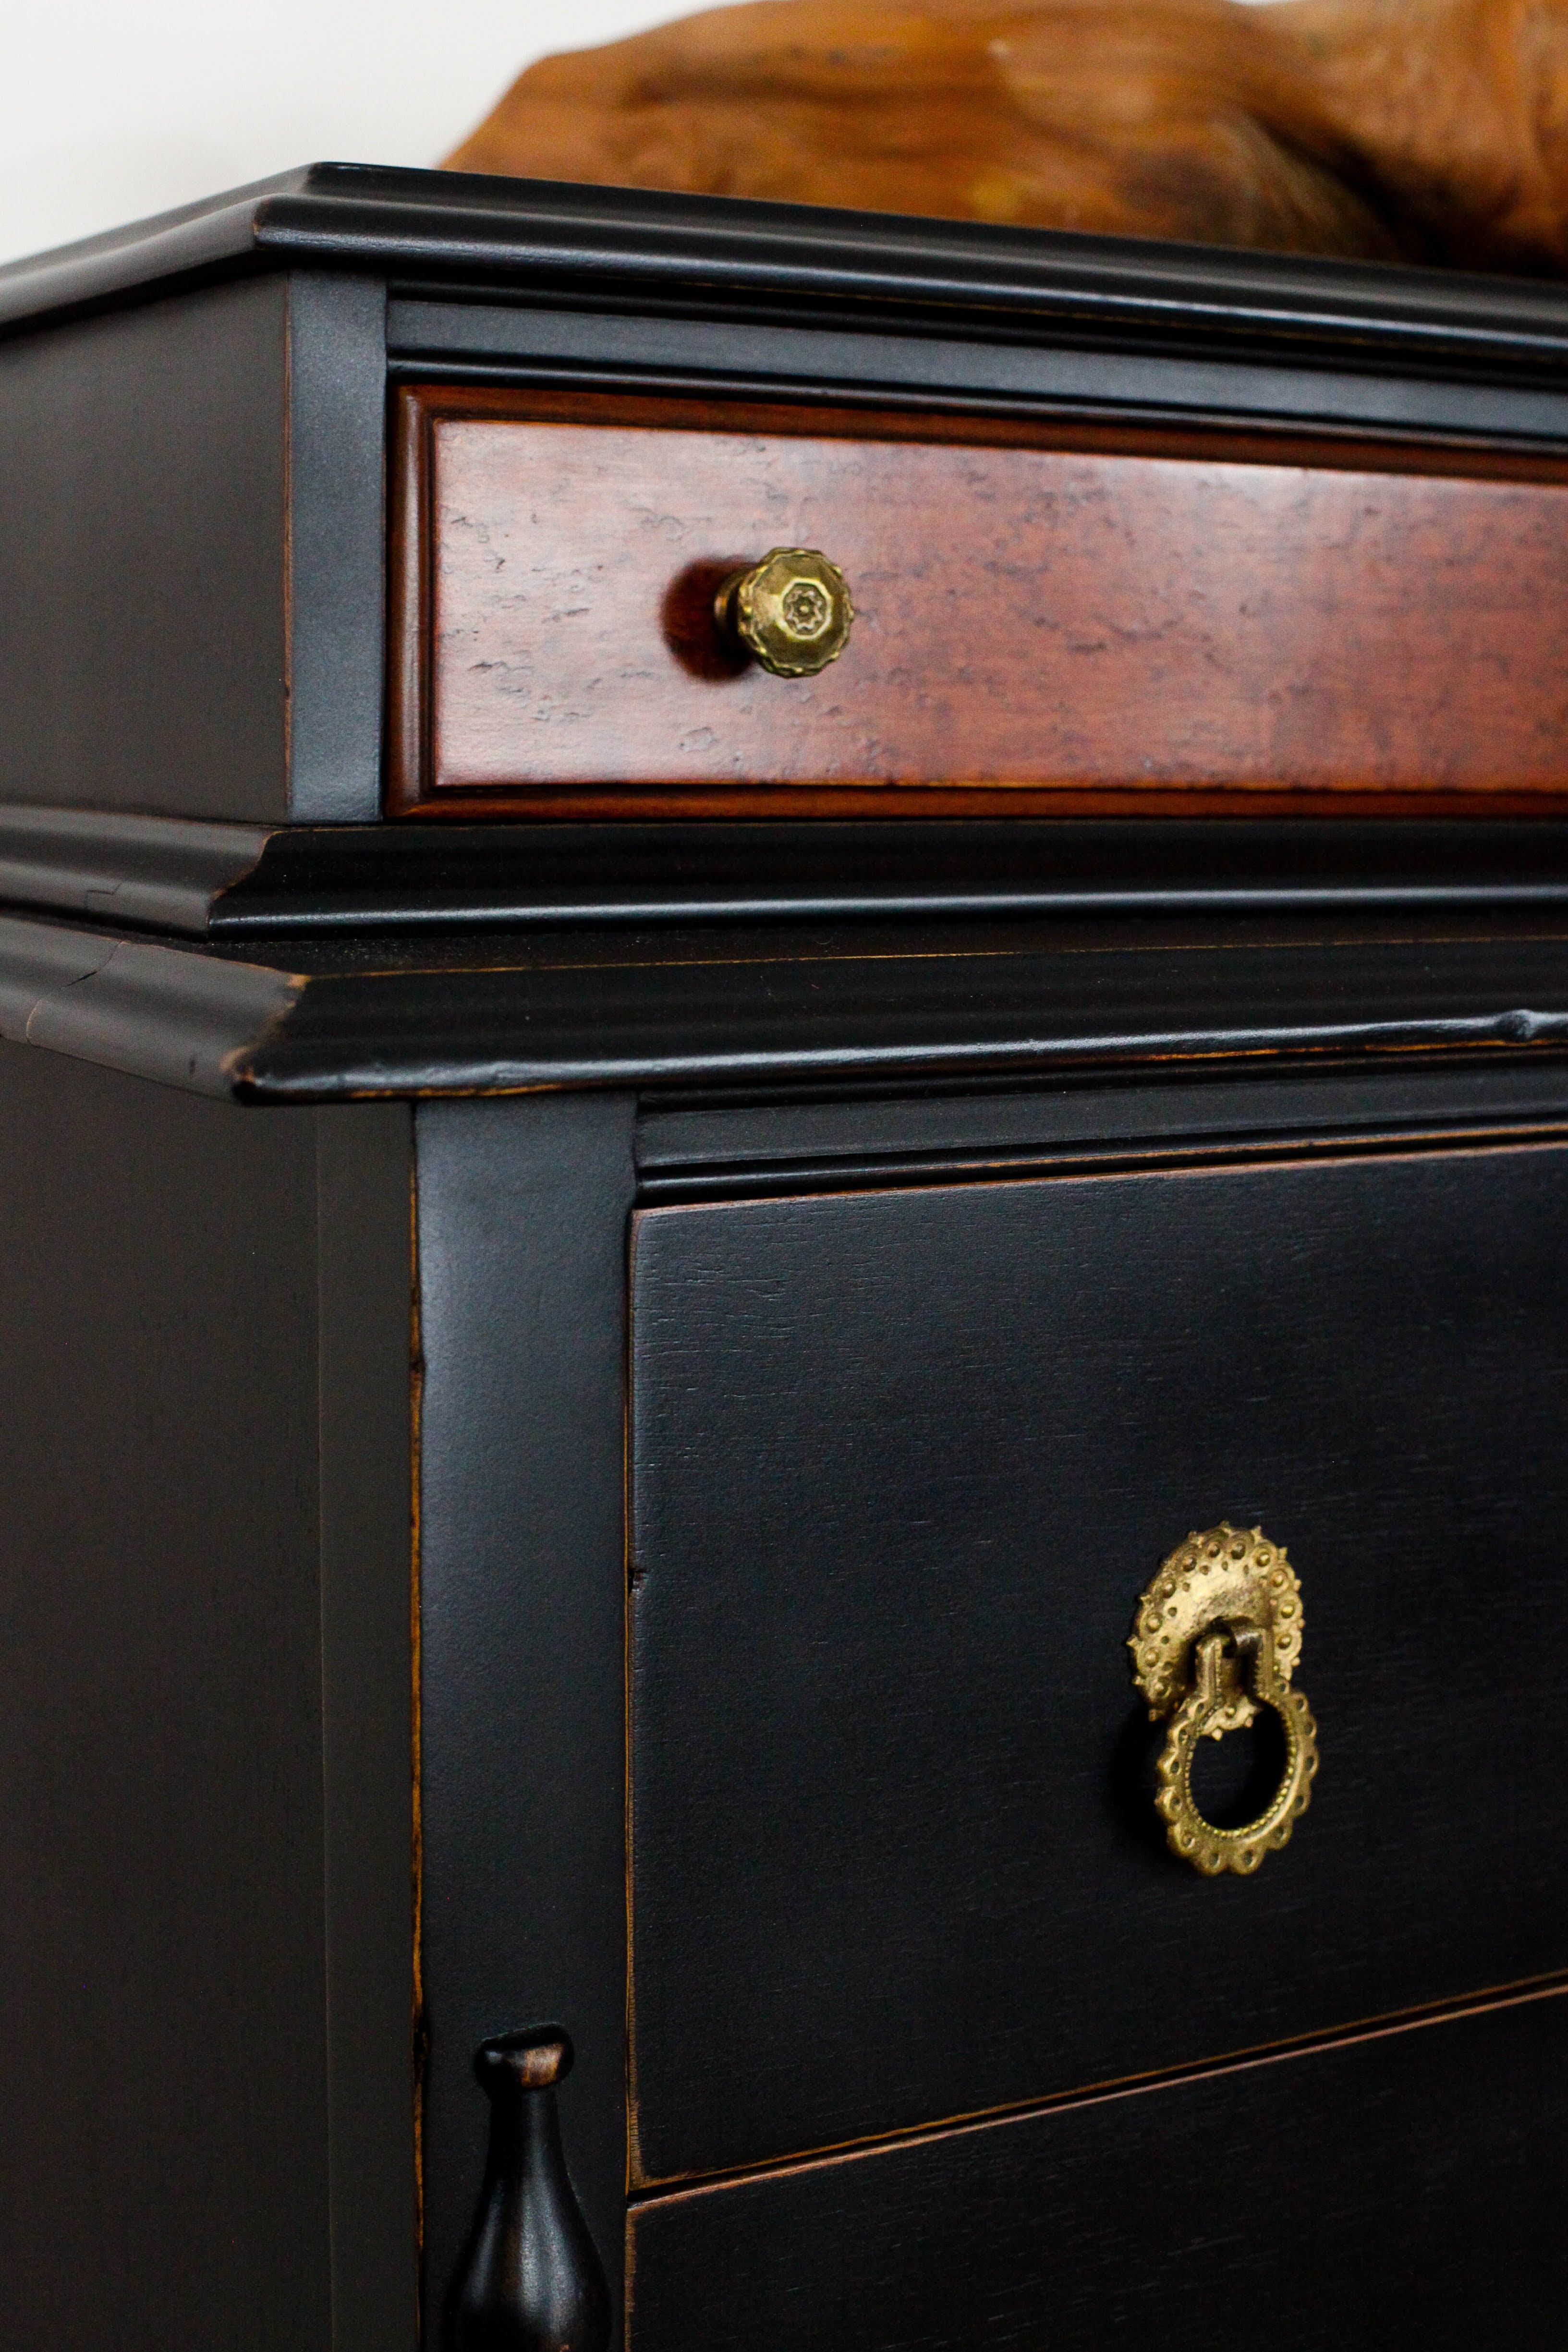 Empire Chest of Drawers